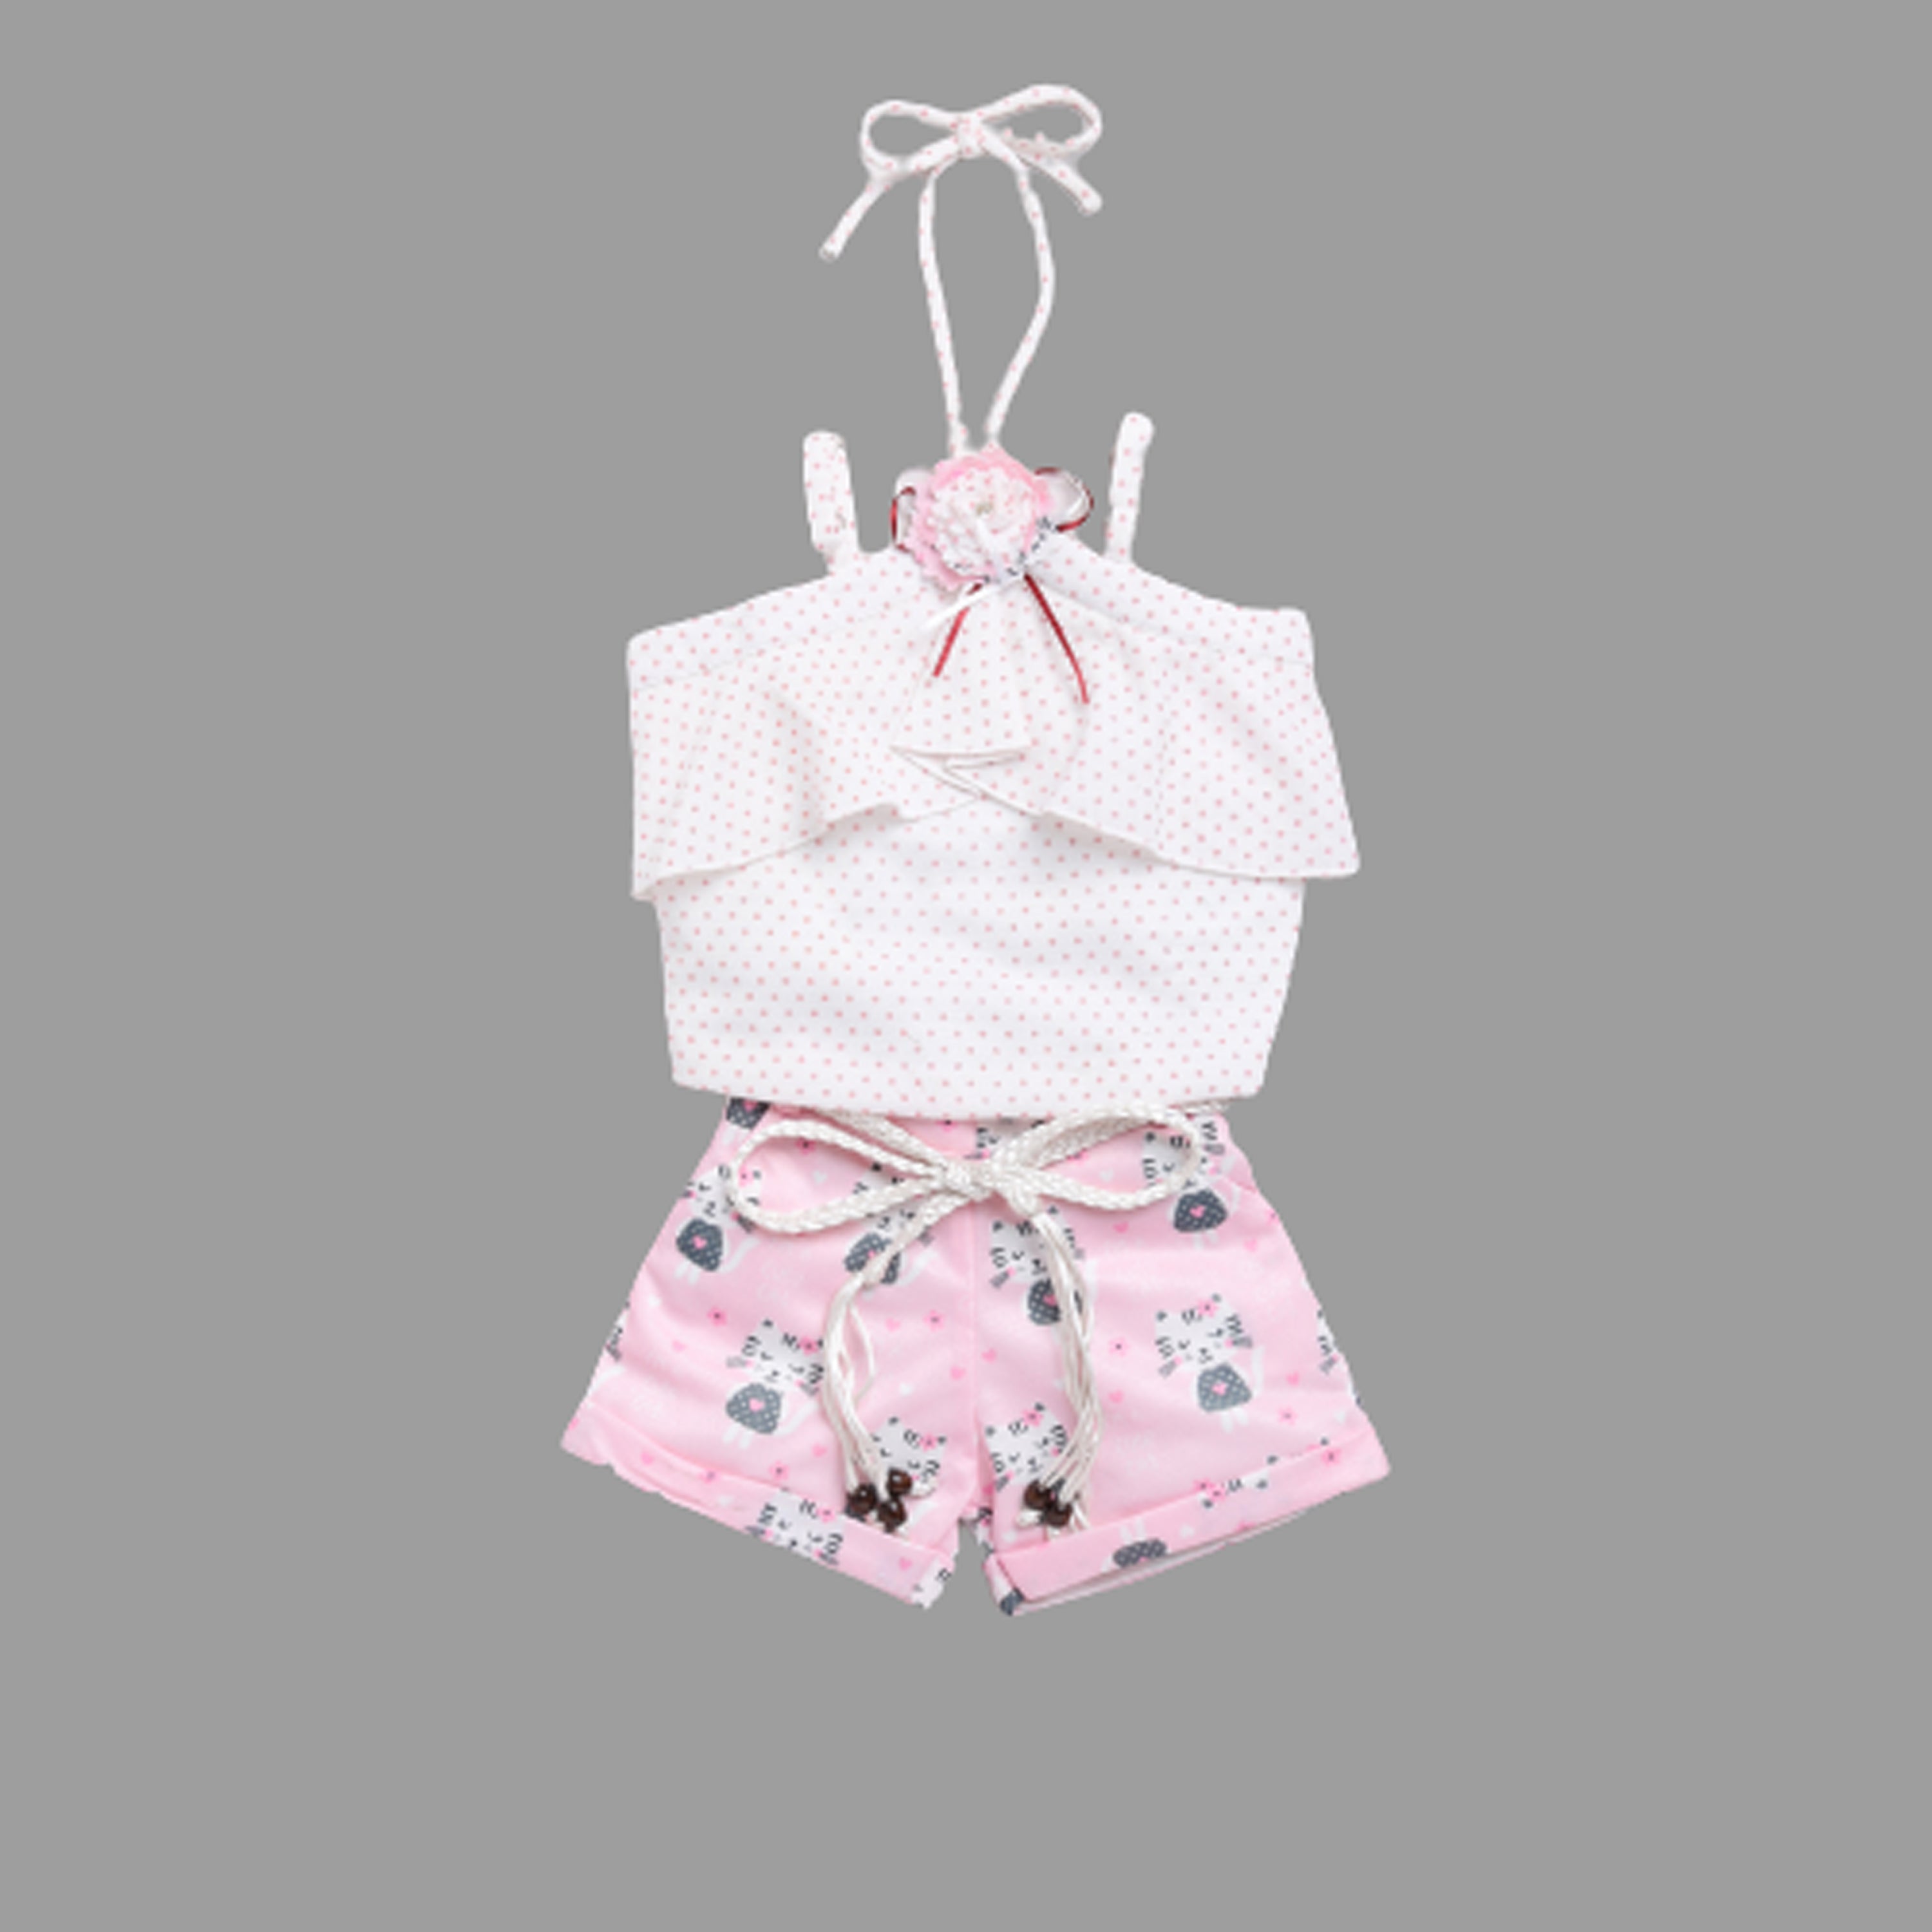 Sleeveless Top With Shorts - Pink